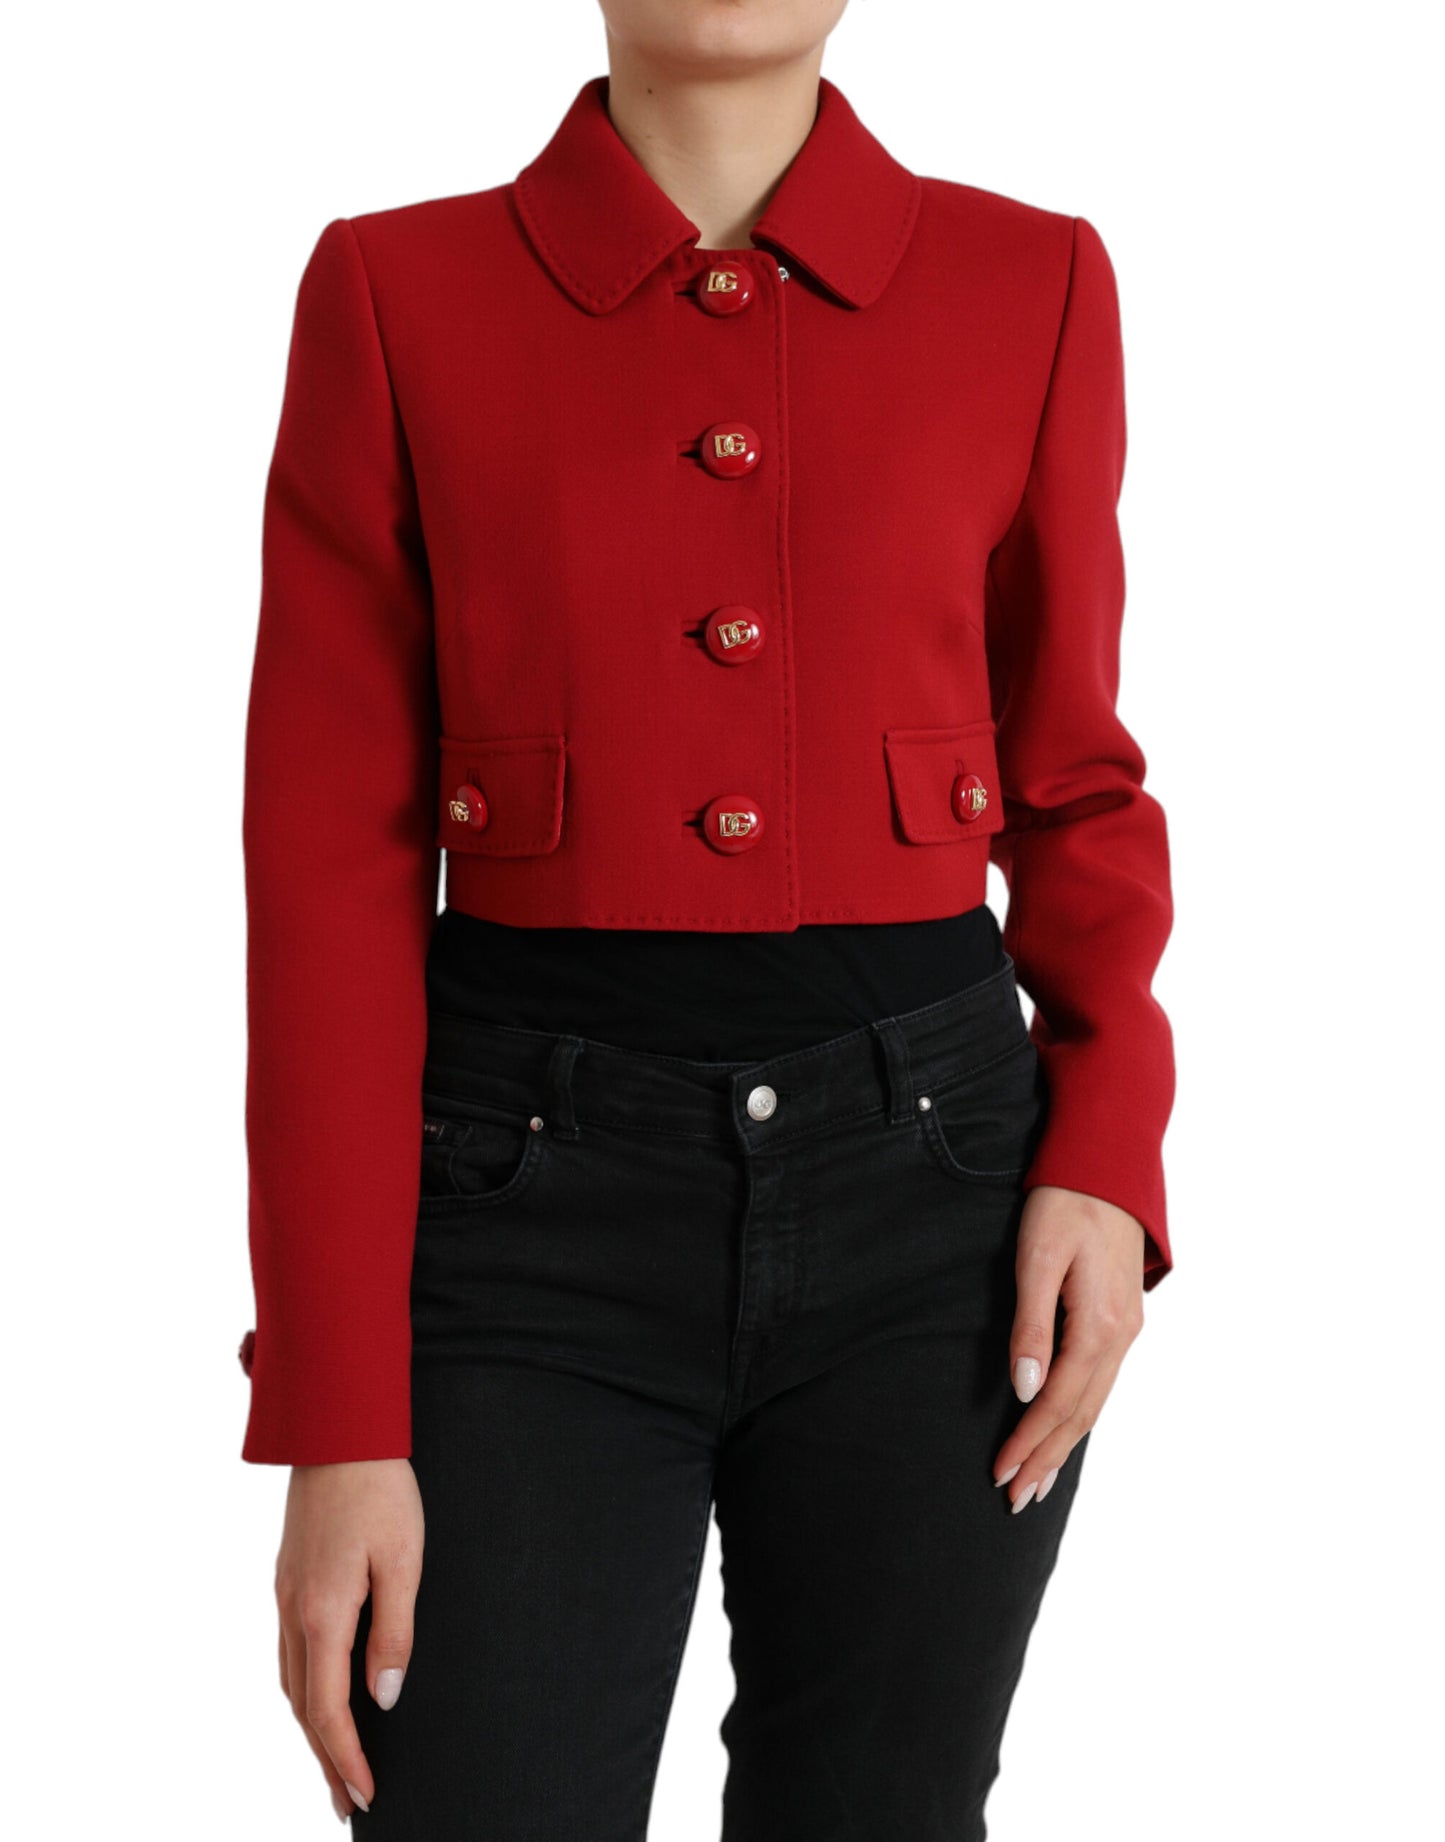 Red Wool Cropped Short Button Coat Jacket